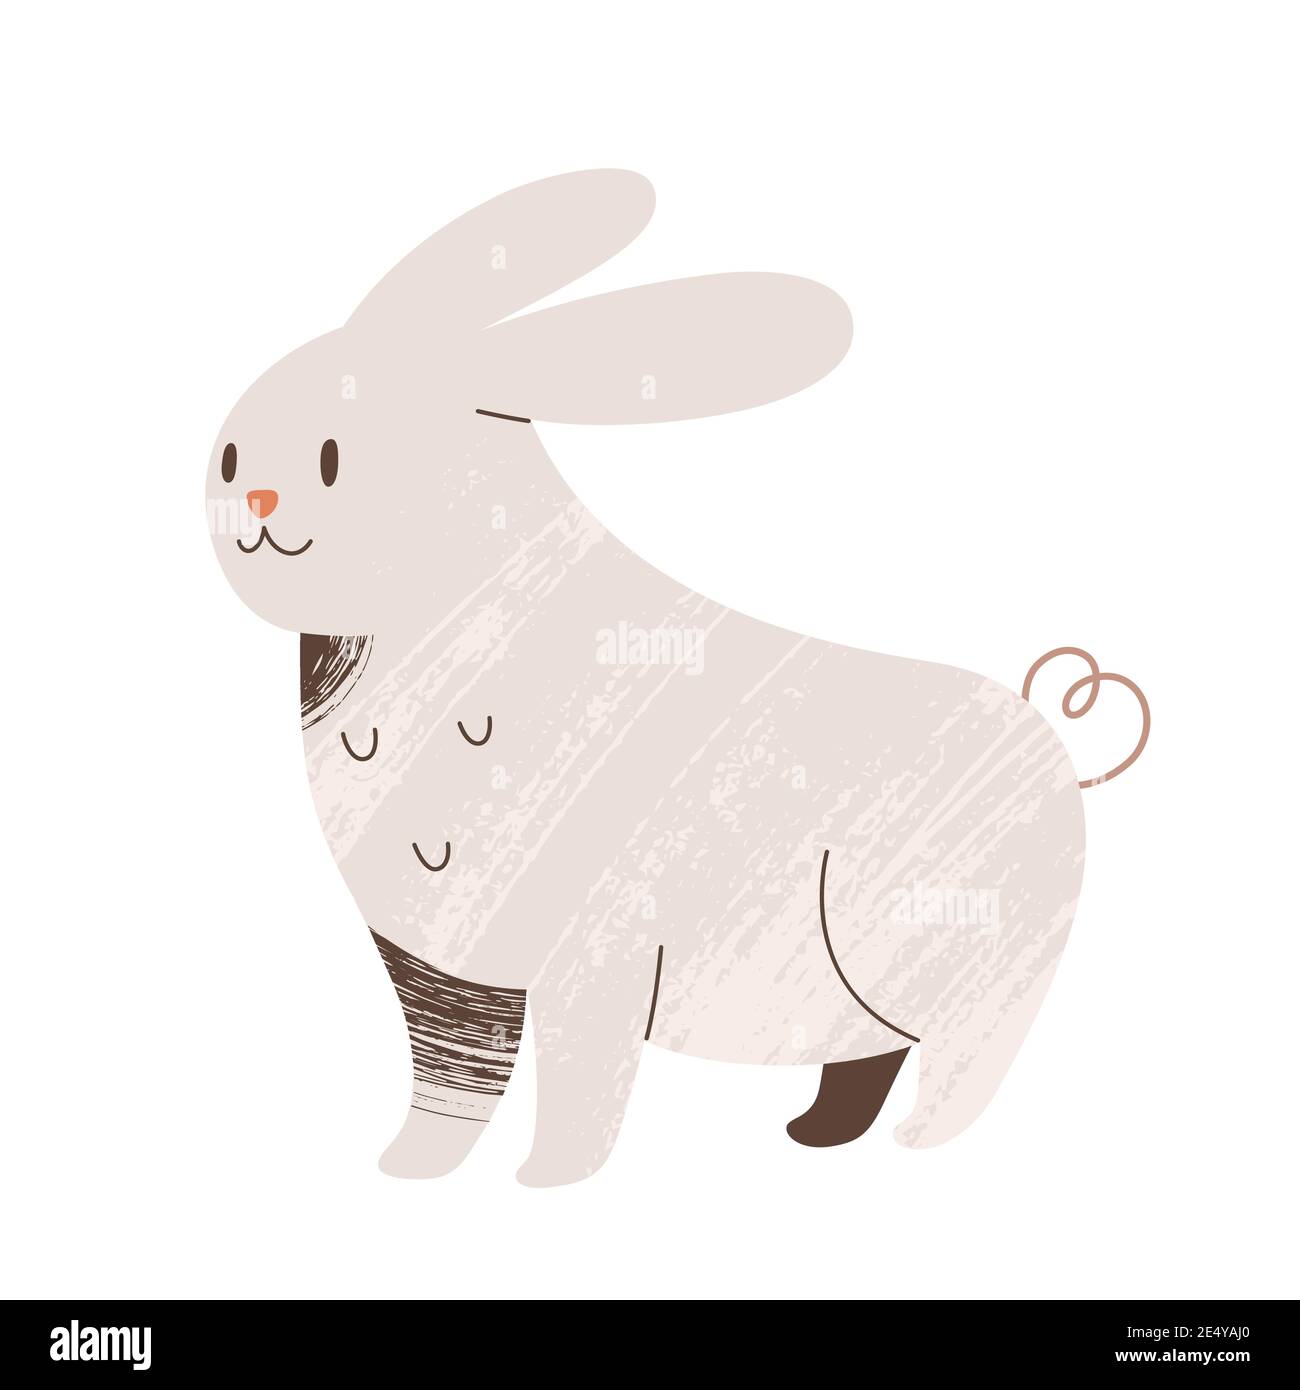 Cute white rabbit doodle illustration, farm animal with face expression, colored mascot, vector clipart isolated Stock Vector